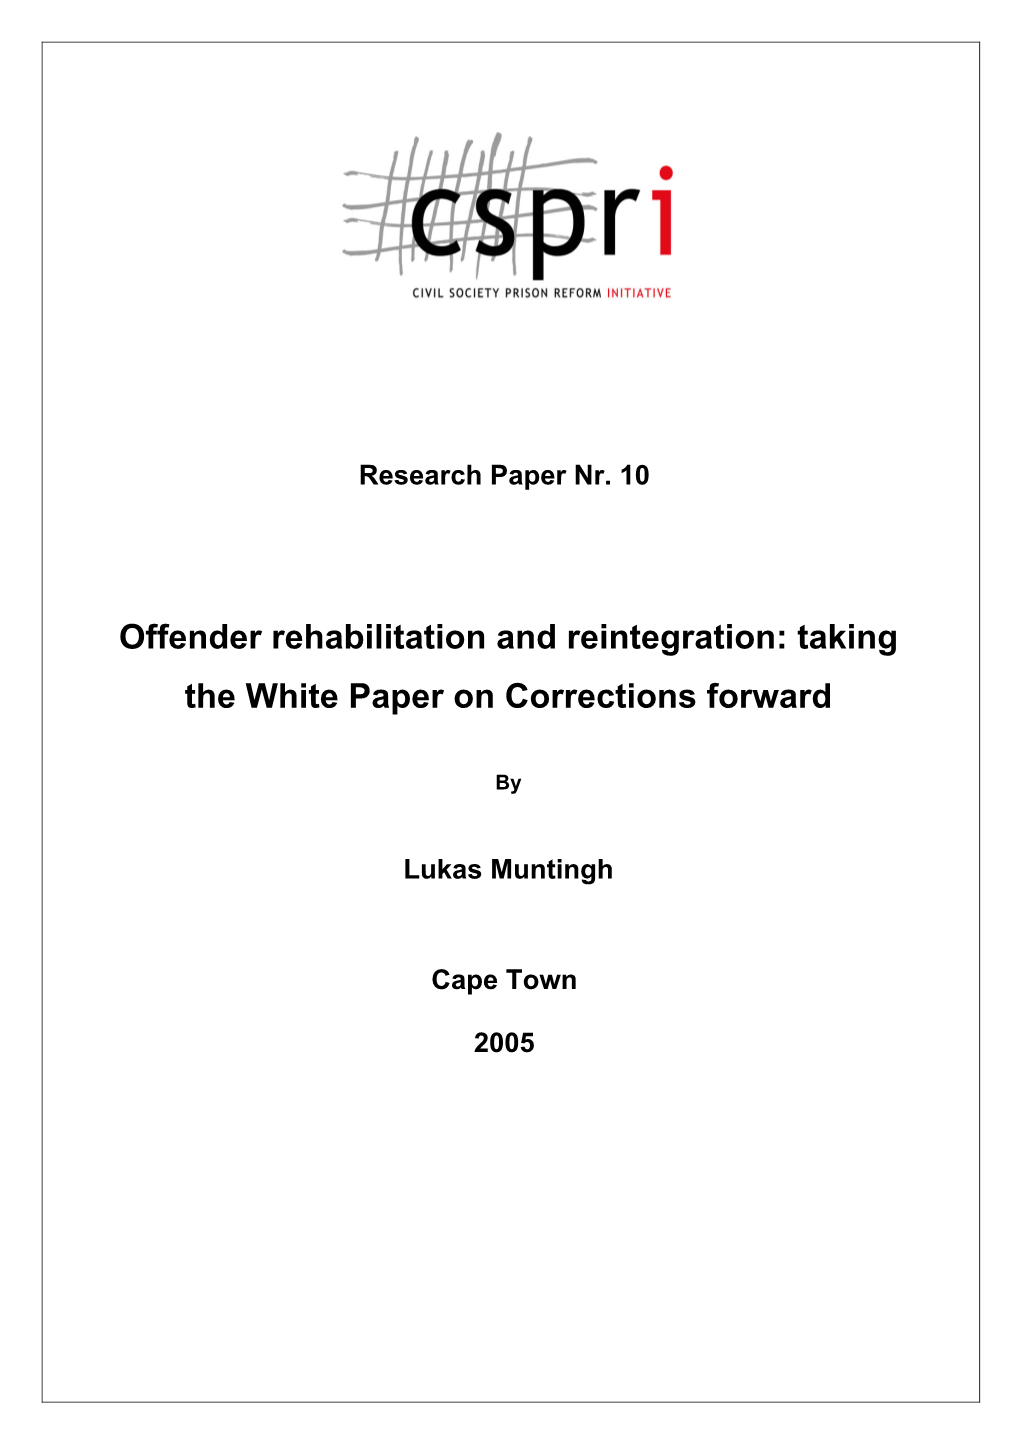 Offender Rehabilitation and Reintegration: Taking the White Paper on Corrections Forward